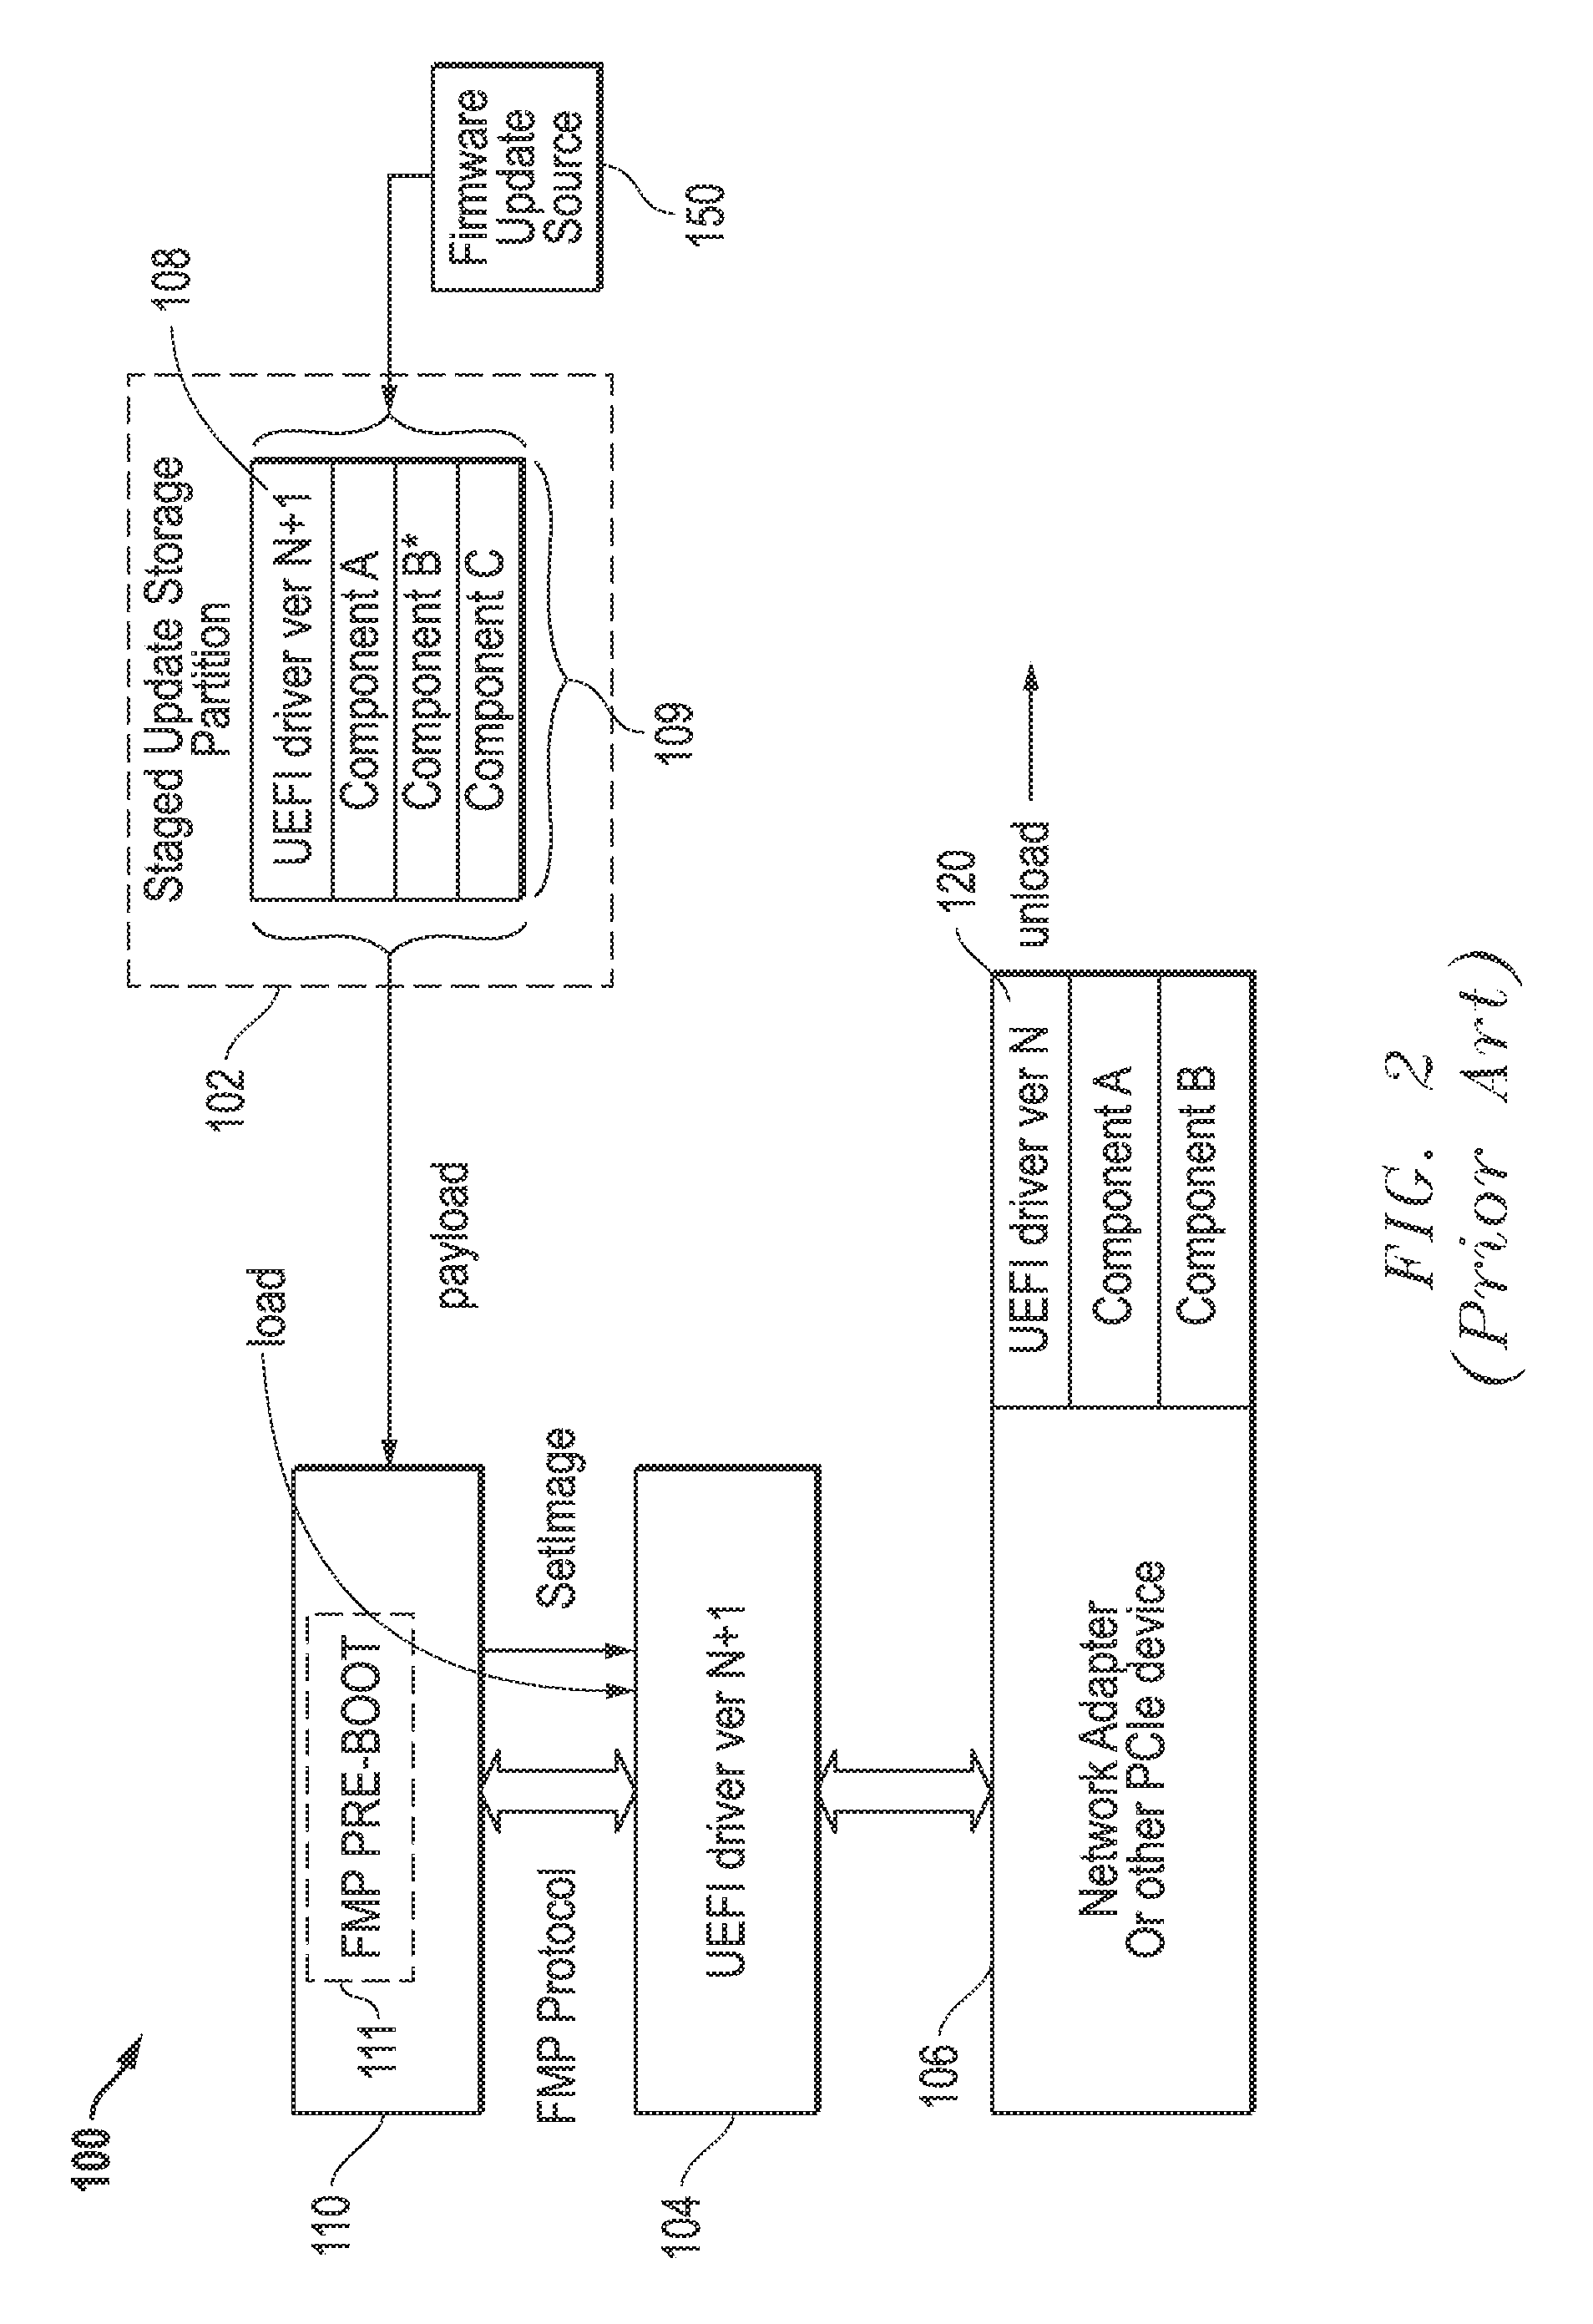 Systems and methods of device firmware delivery for pre-boot updates